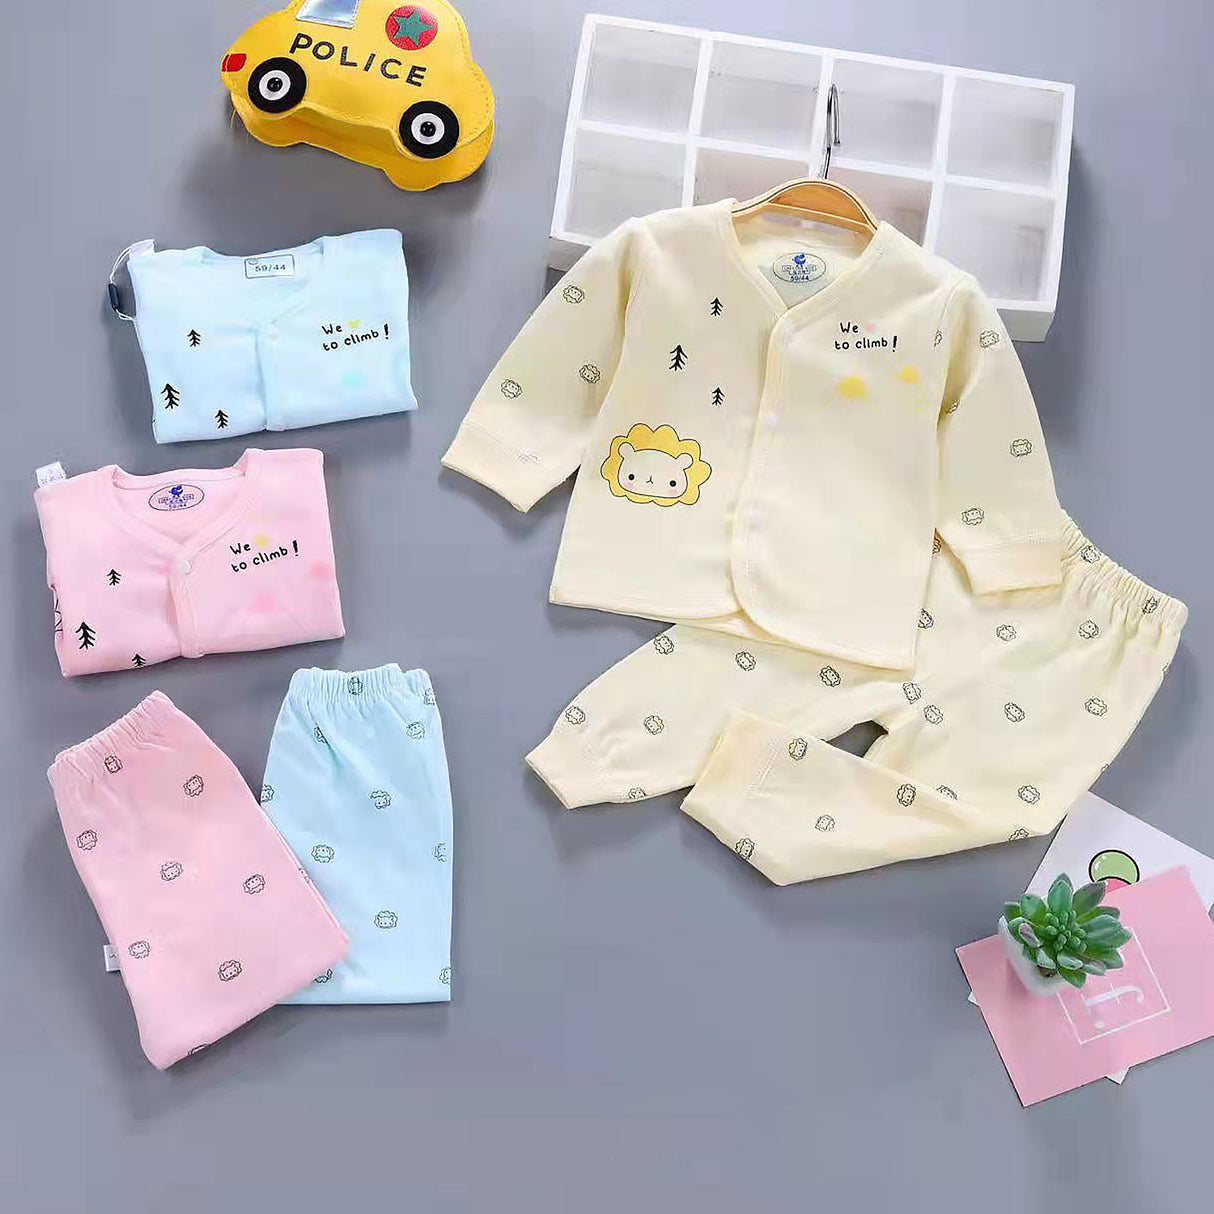 Cute Teddy Full Sleeves Top And Pyjama Buttoned Cotton Night Suit